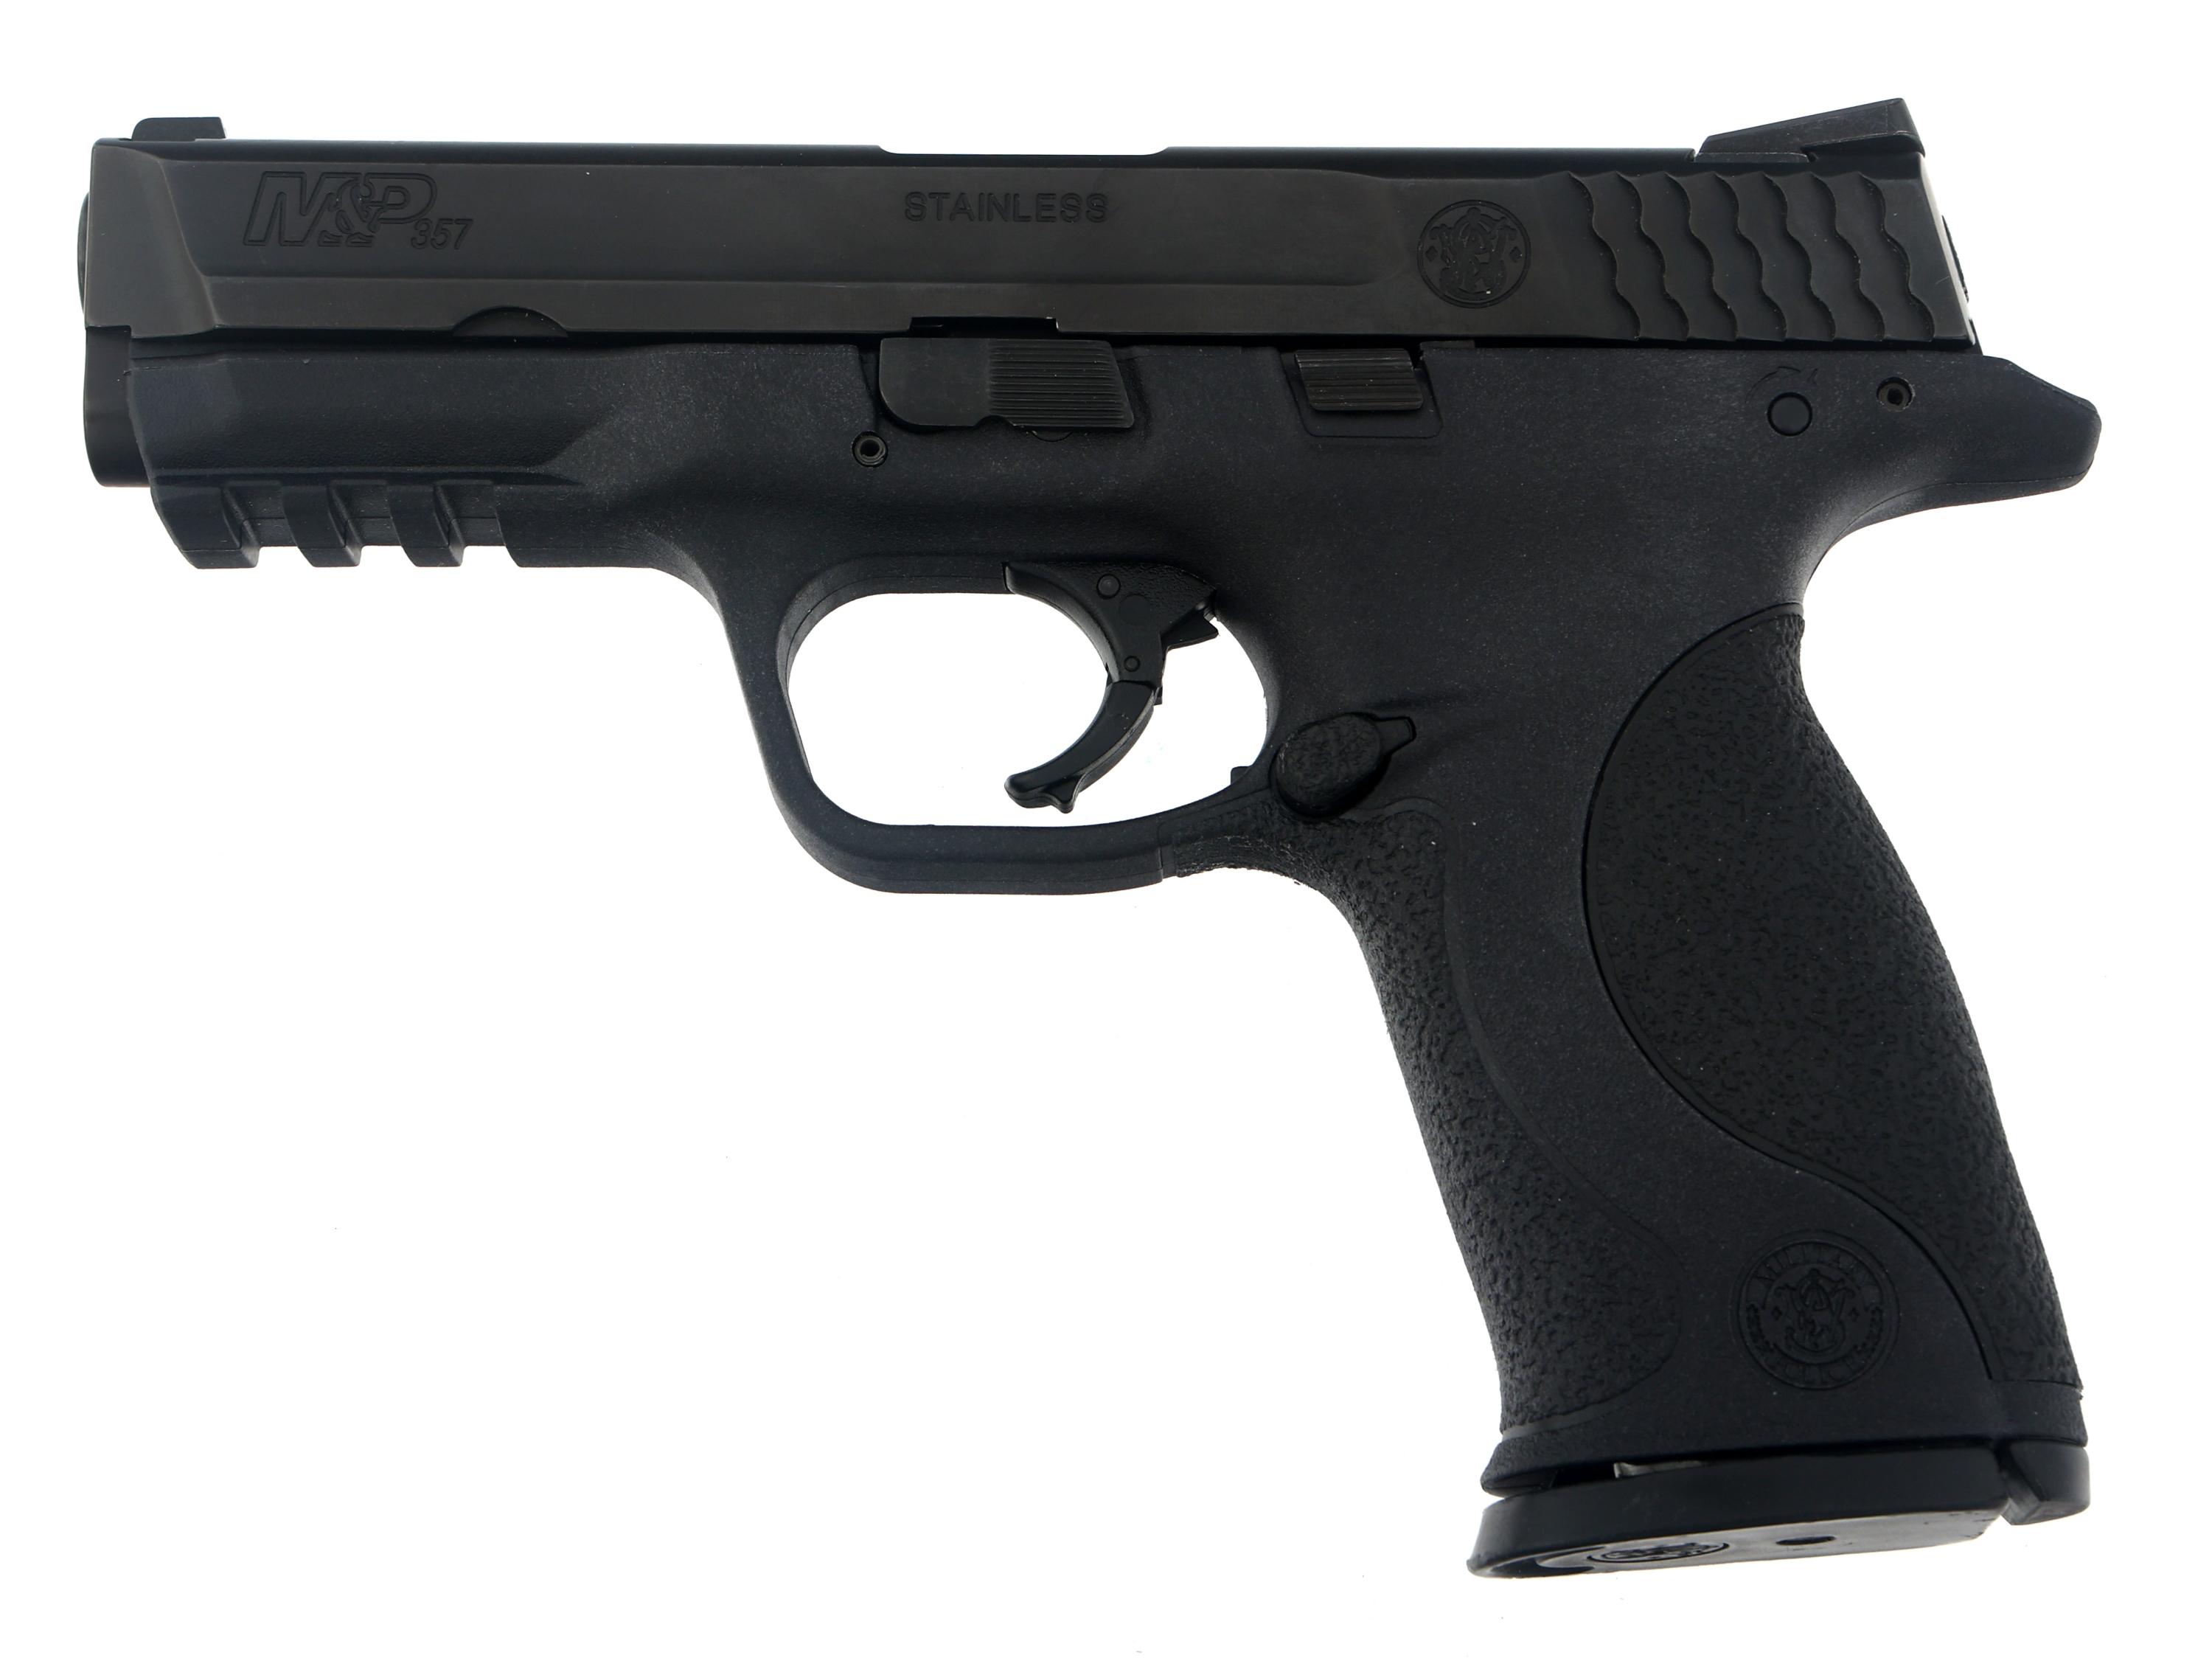 SMITH & WESSON MODEL M&P 357 .357 SIG CAL PISTOL